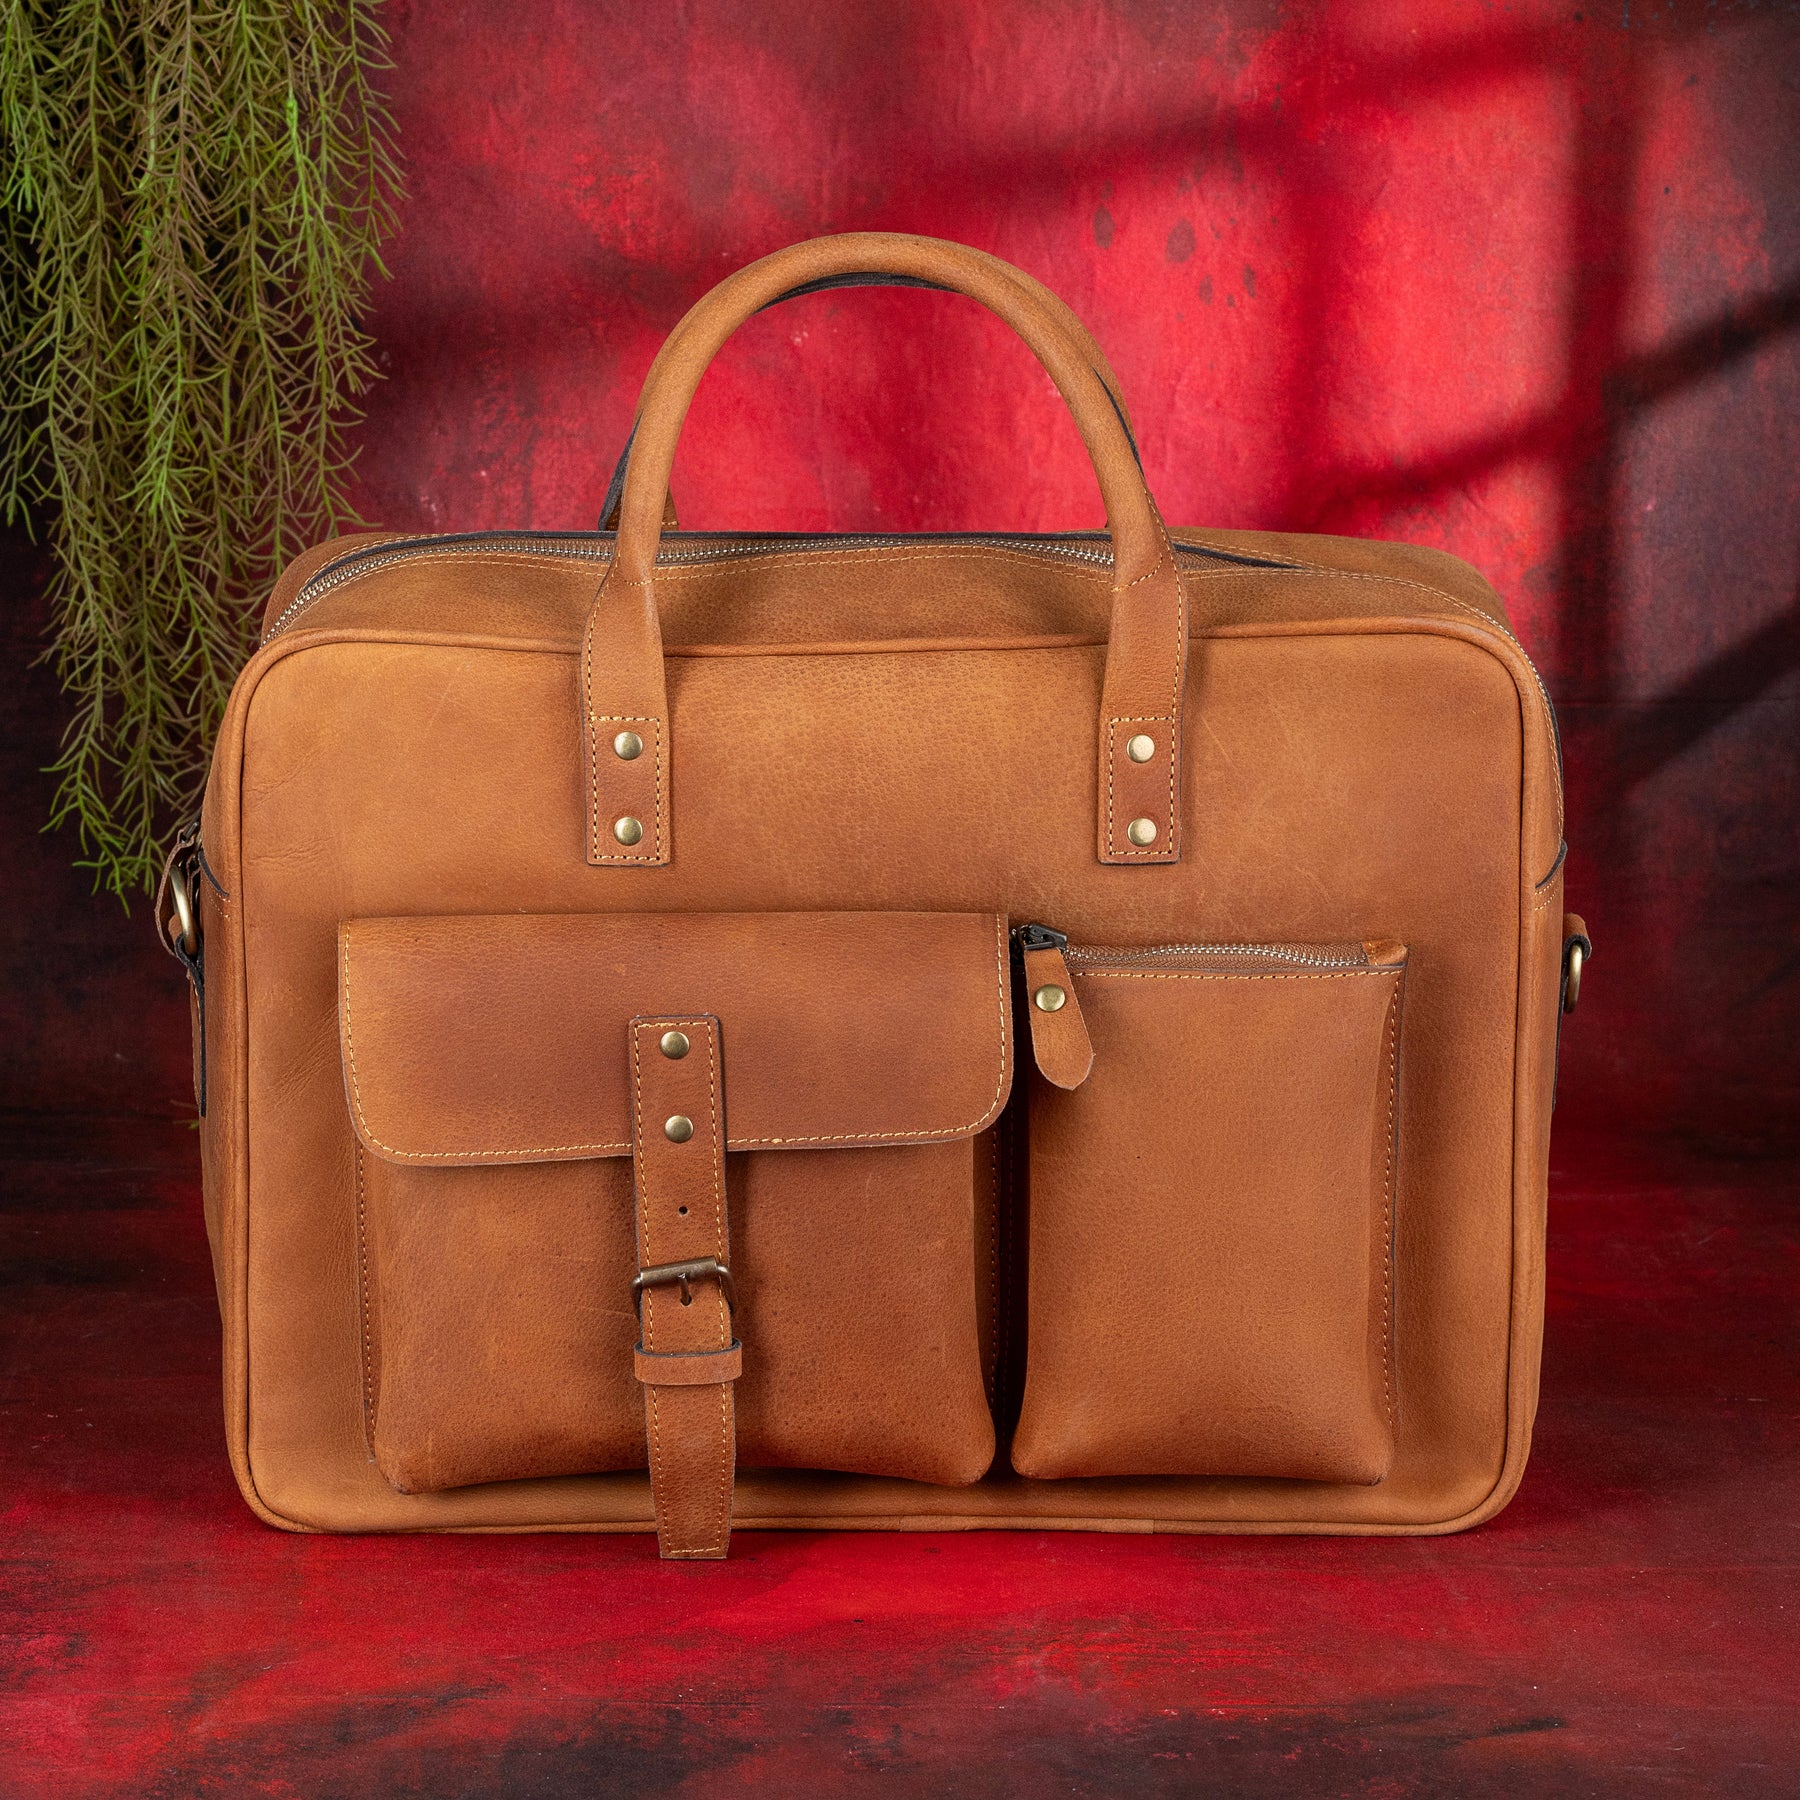 Shriners Briefcase - Brown Leather - Bricks Masons